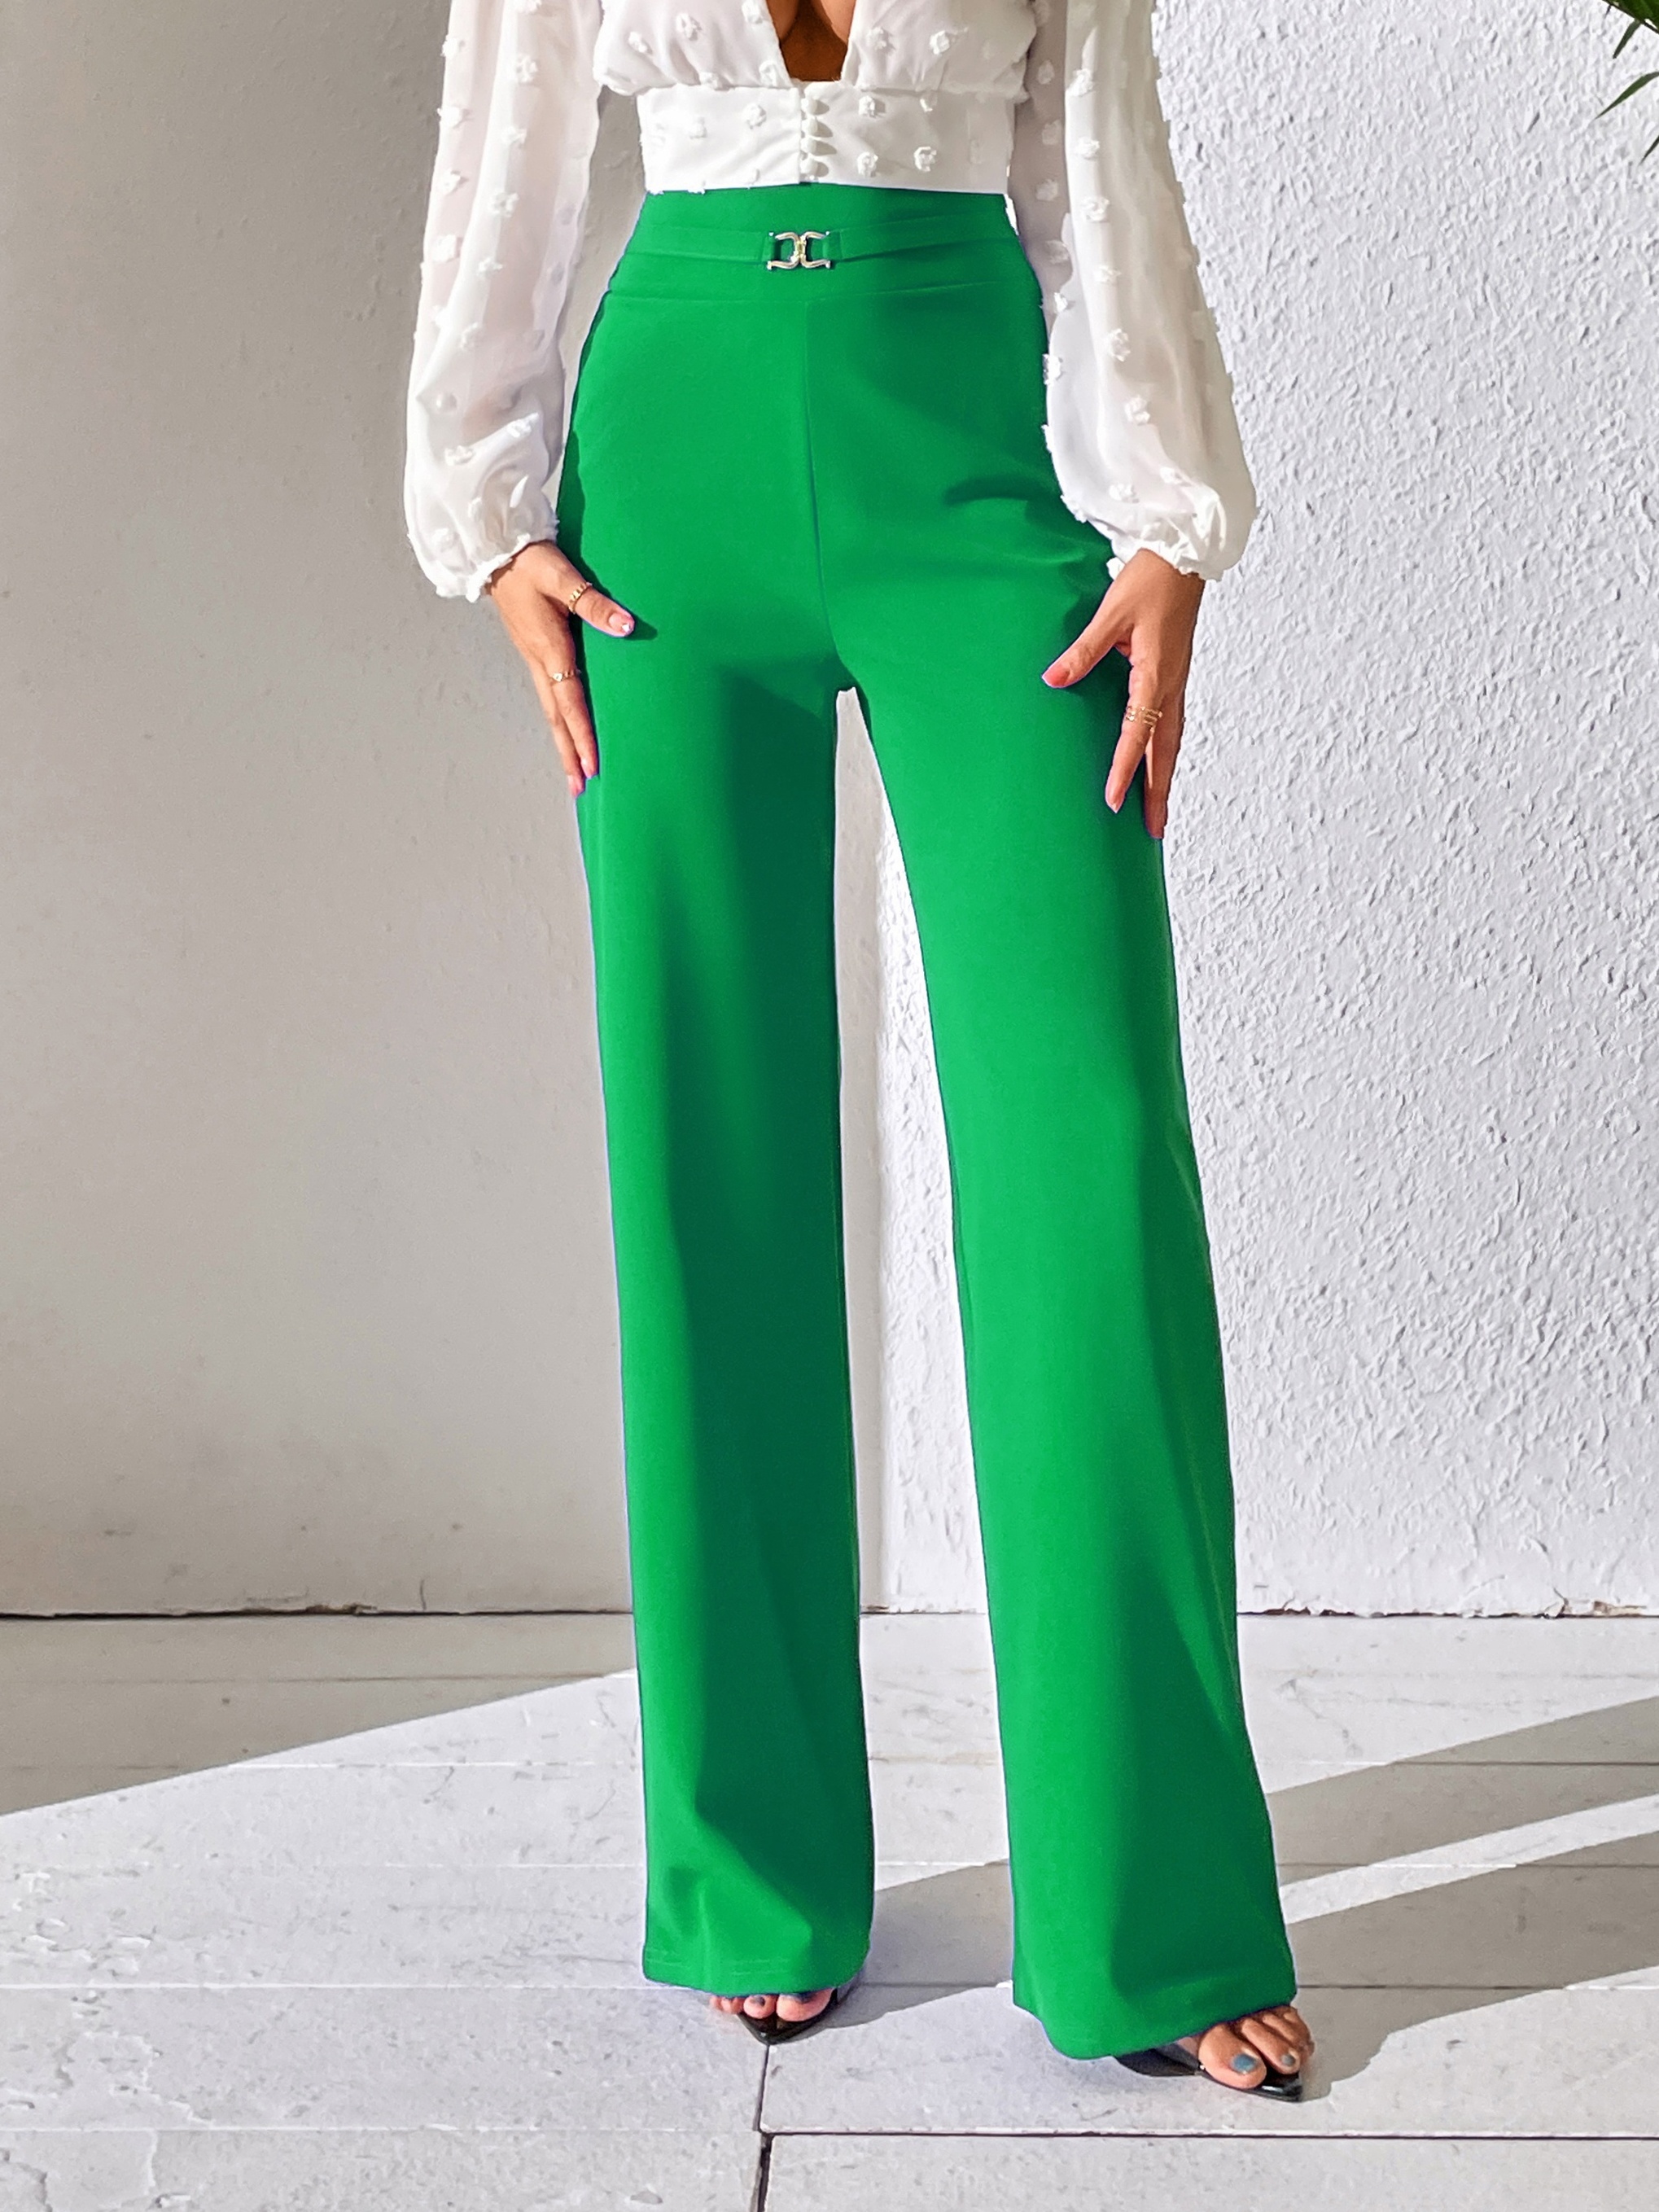 Women's Work Pants, Tailored, High-Waisted & More